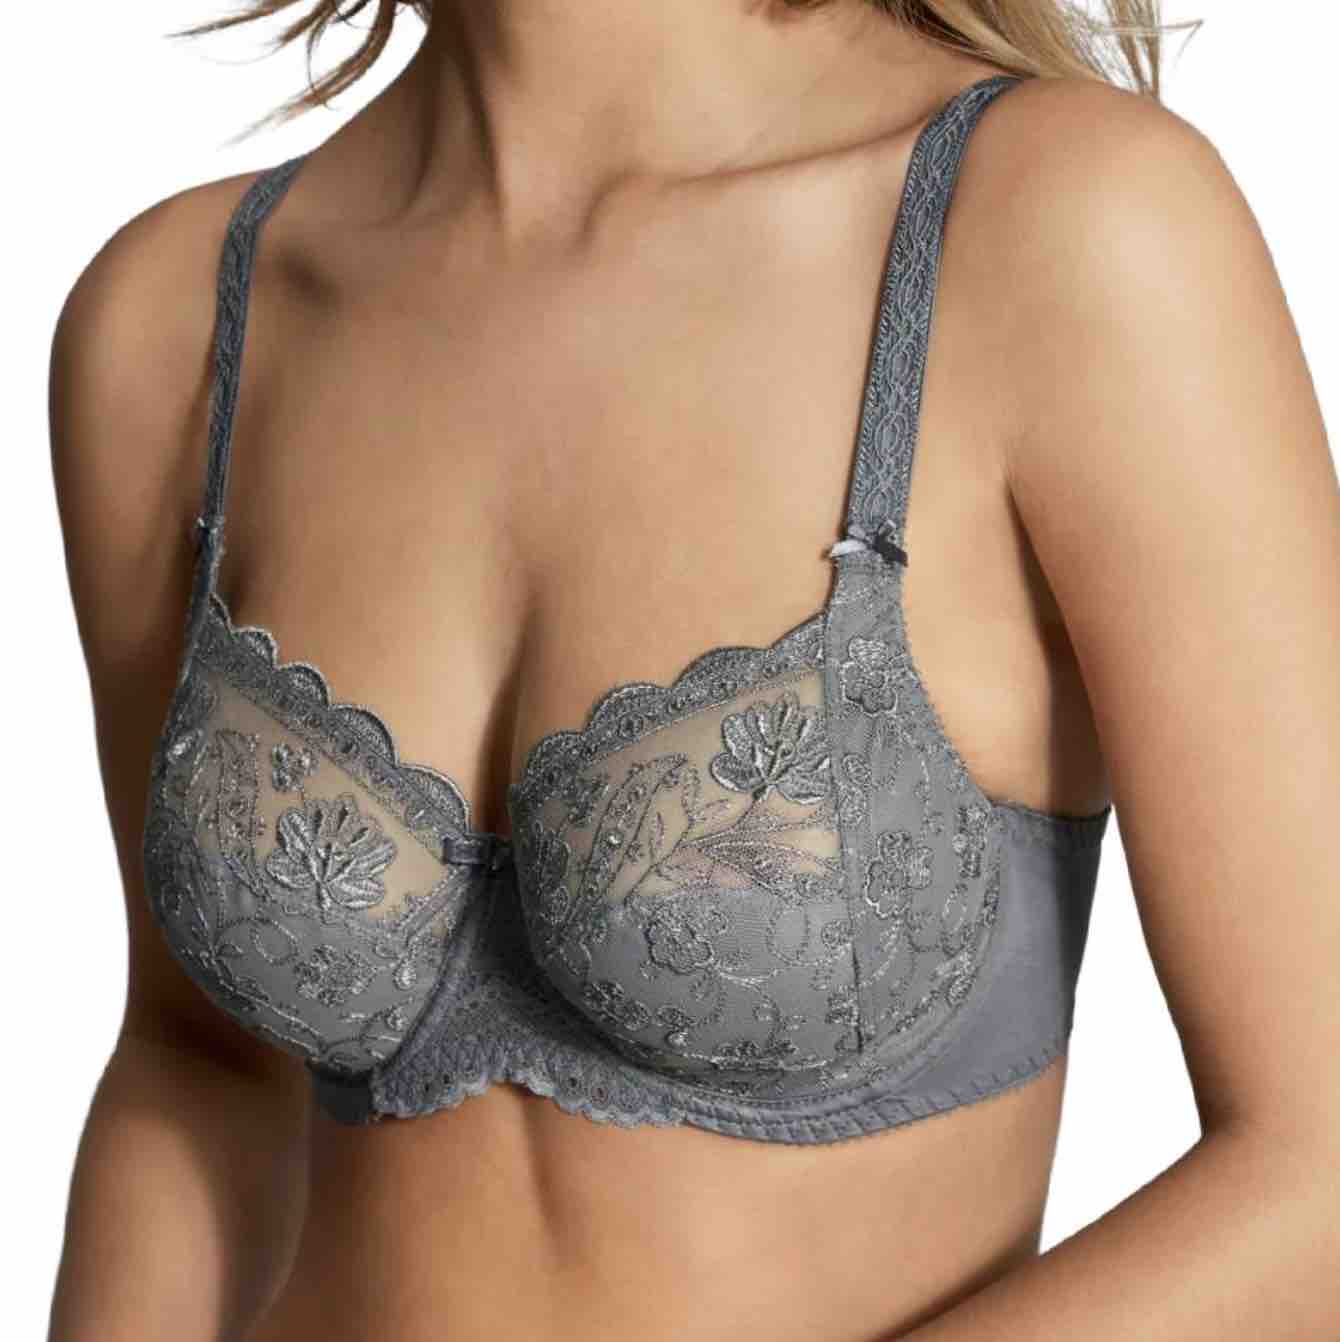 Shop for Cleo by Panache, DD+, Bras, Lingerie